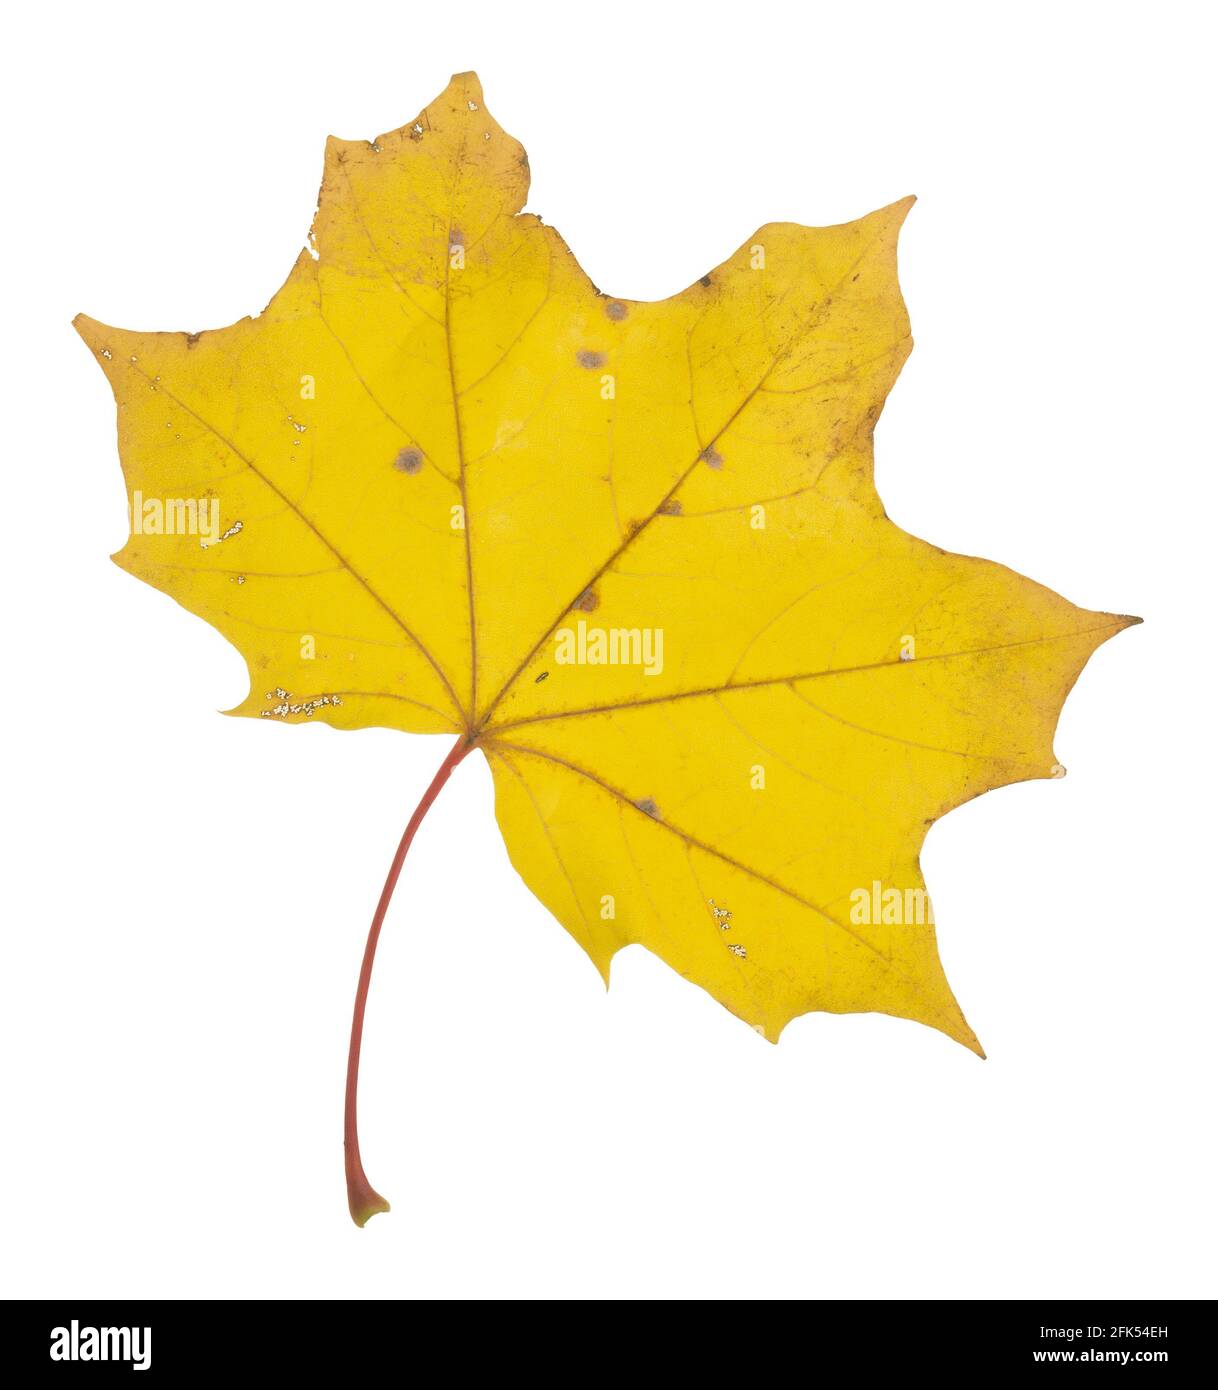 Closeup of a norway yellow maple, Acer platanoides leaf isolated on white background Stock Photo